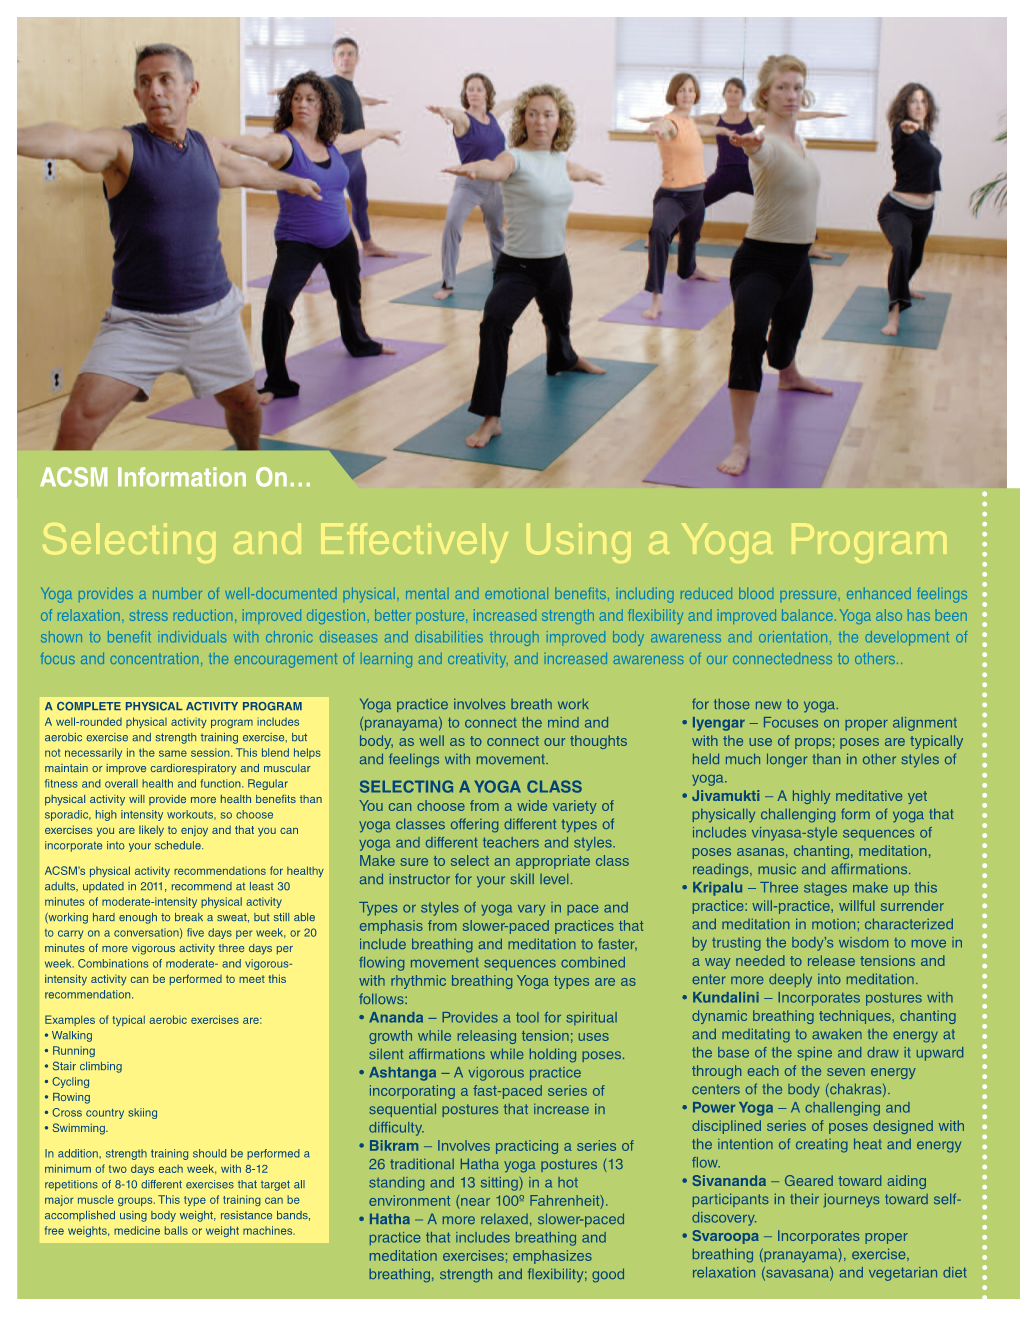 Selecting and Effectively Using a Yoga Program